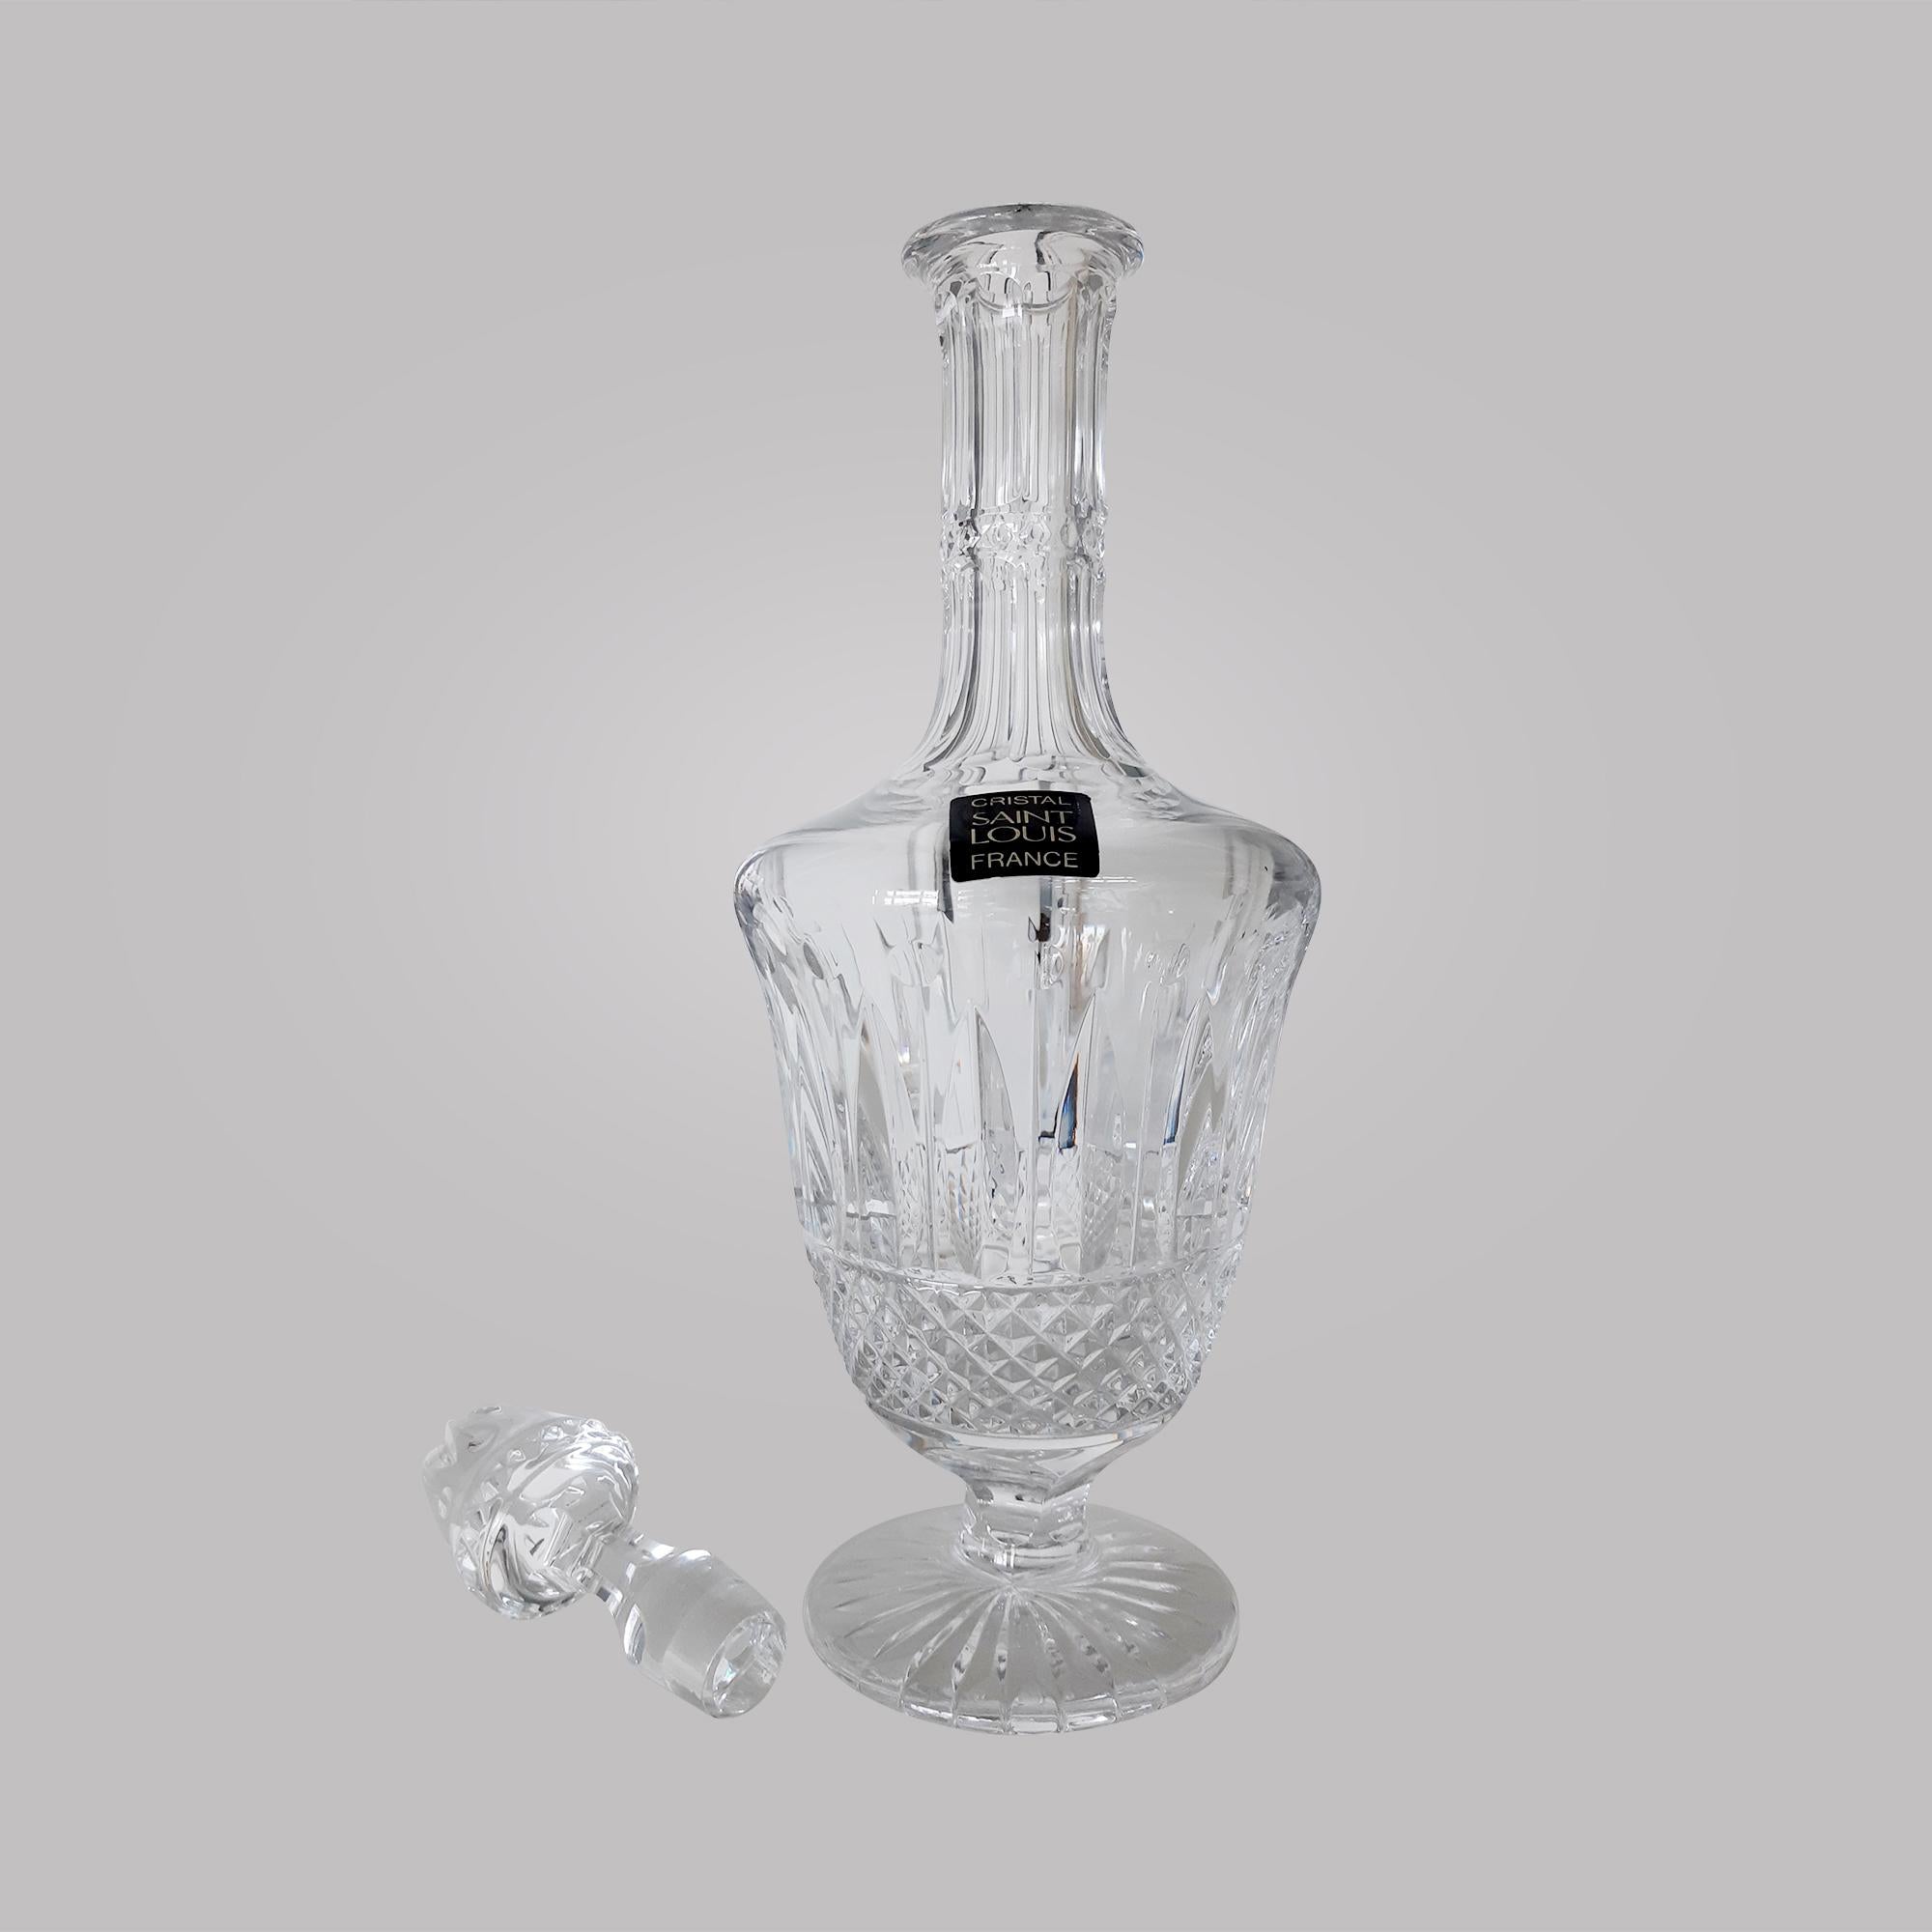 Elegant wine decanter in cut crystal from the house of Saint-Louis.
From its star-cut base to the dazzling reflections of diamond, bevel, fluke and pearl cuts, the “Tommy” model has remained timeless since 1928.

Created in 1928, in honor of